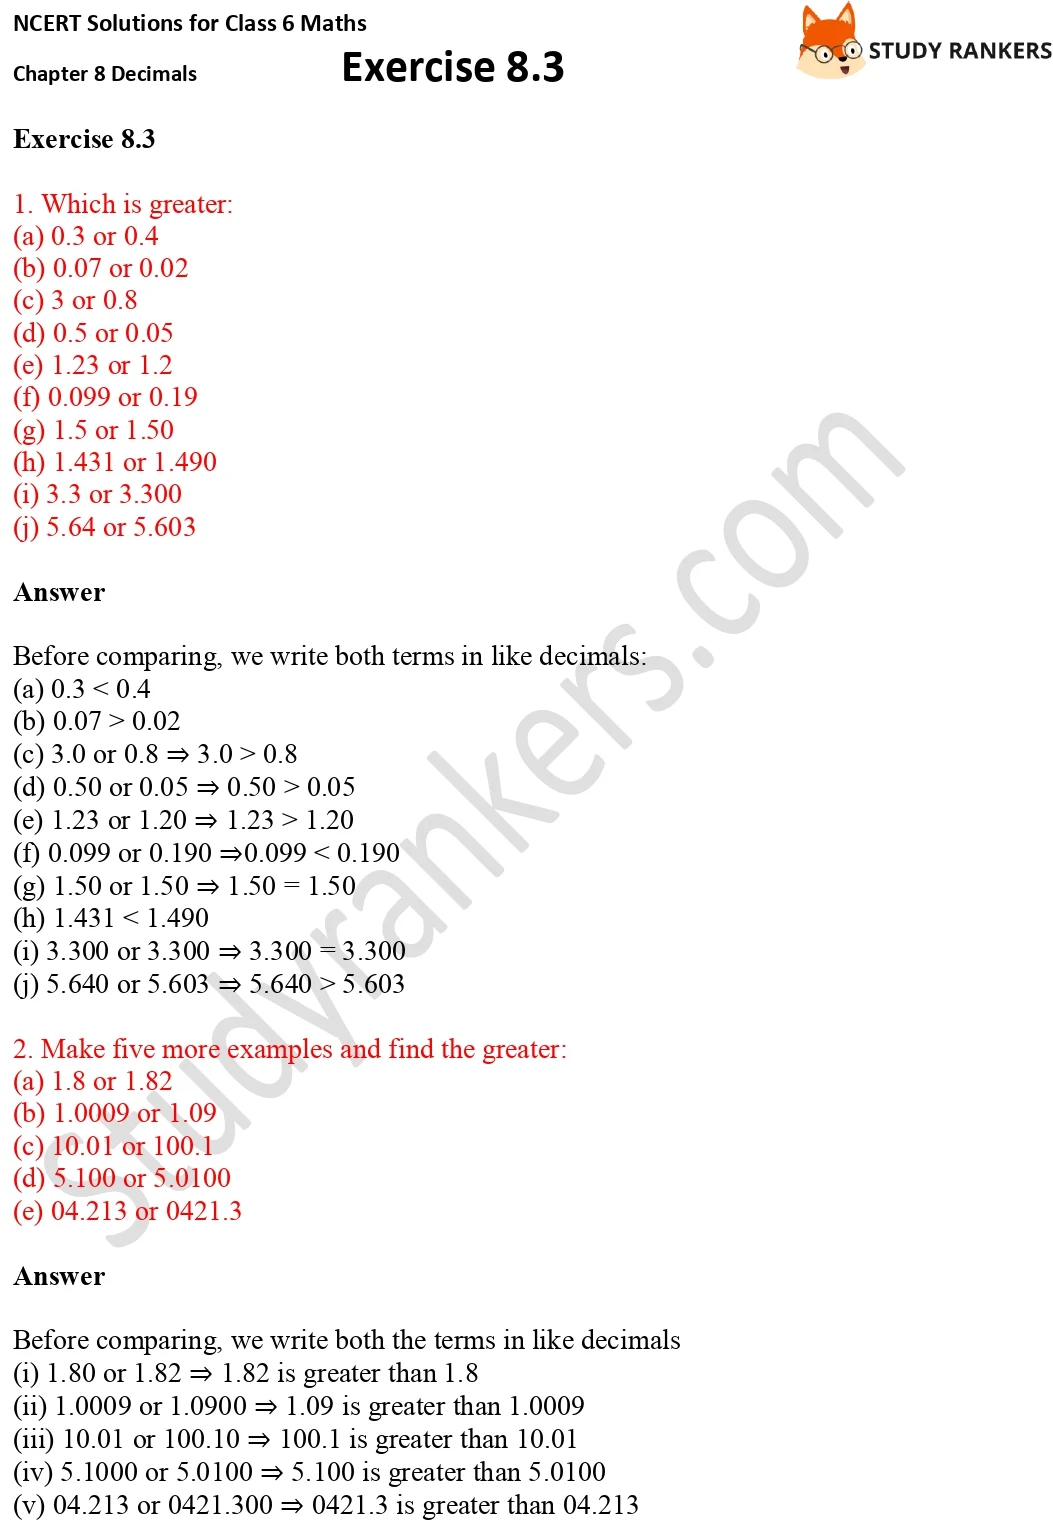 NCERT Solutions for Class 6 Maths Chapter 8 Decimals Exercise 8.3